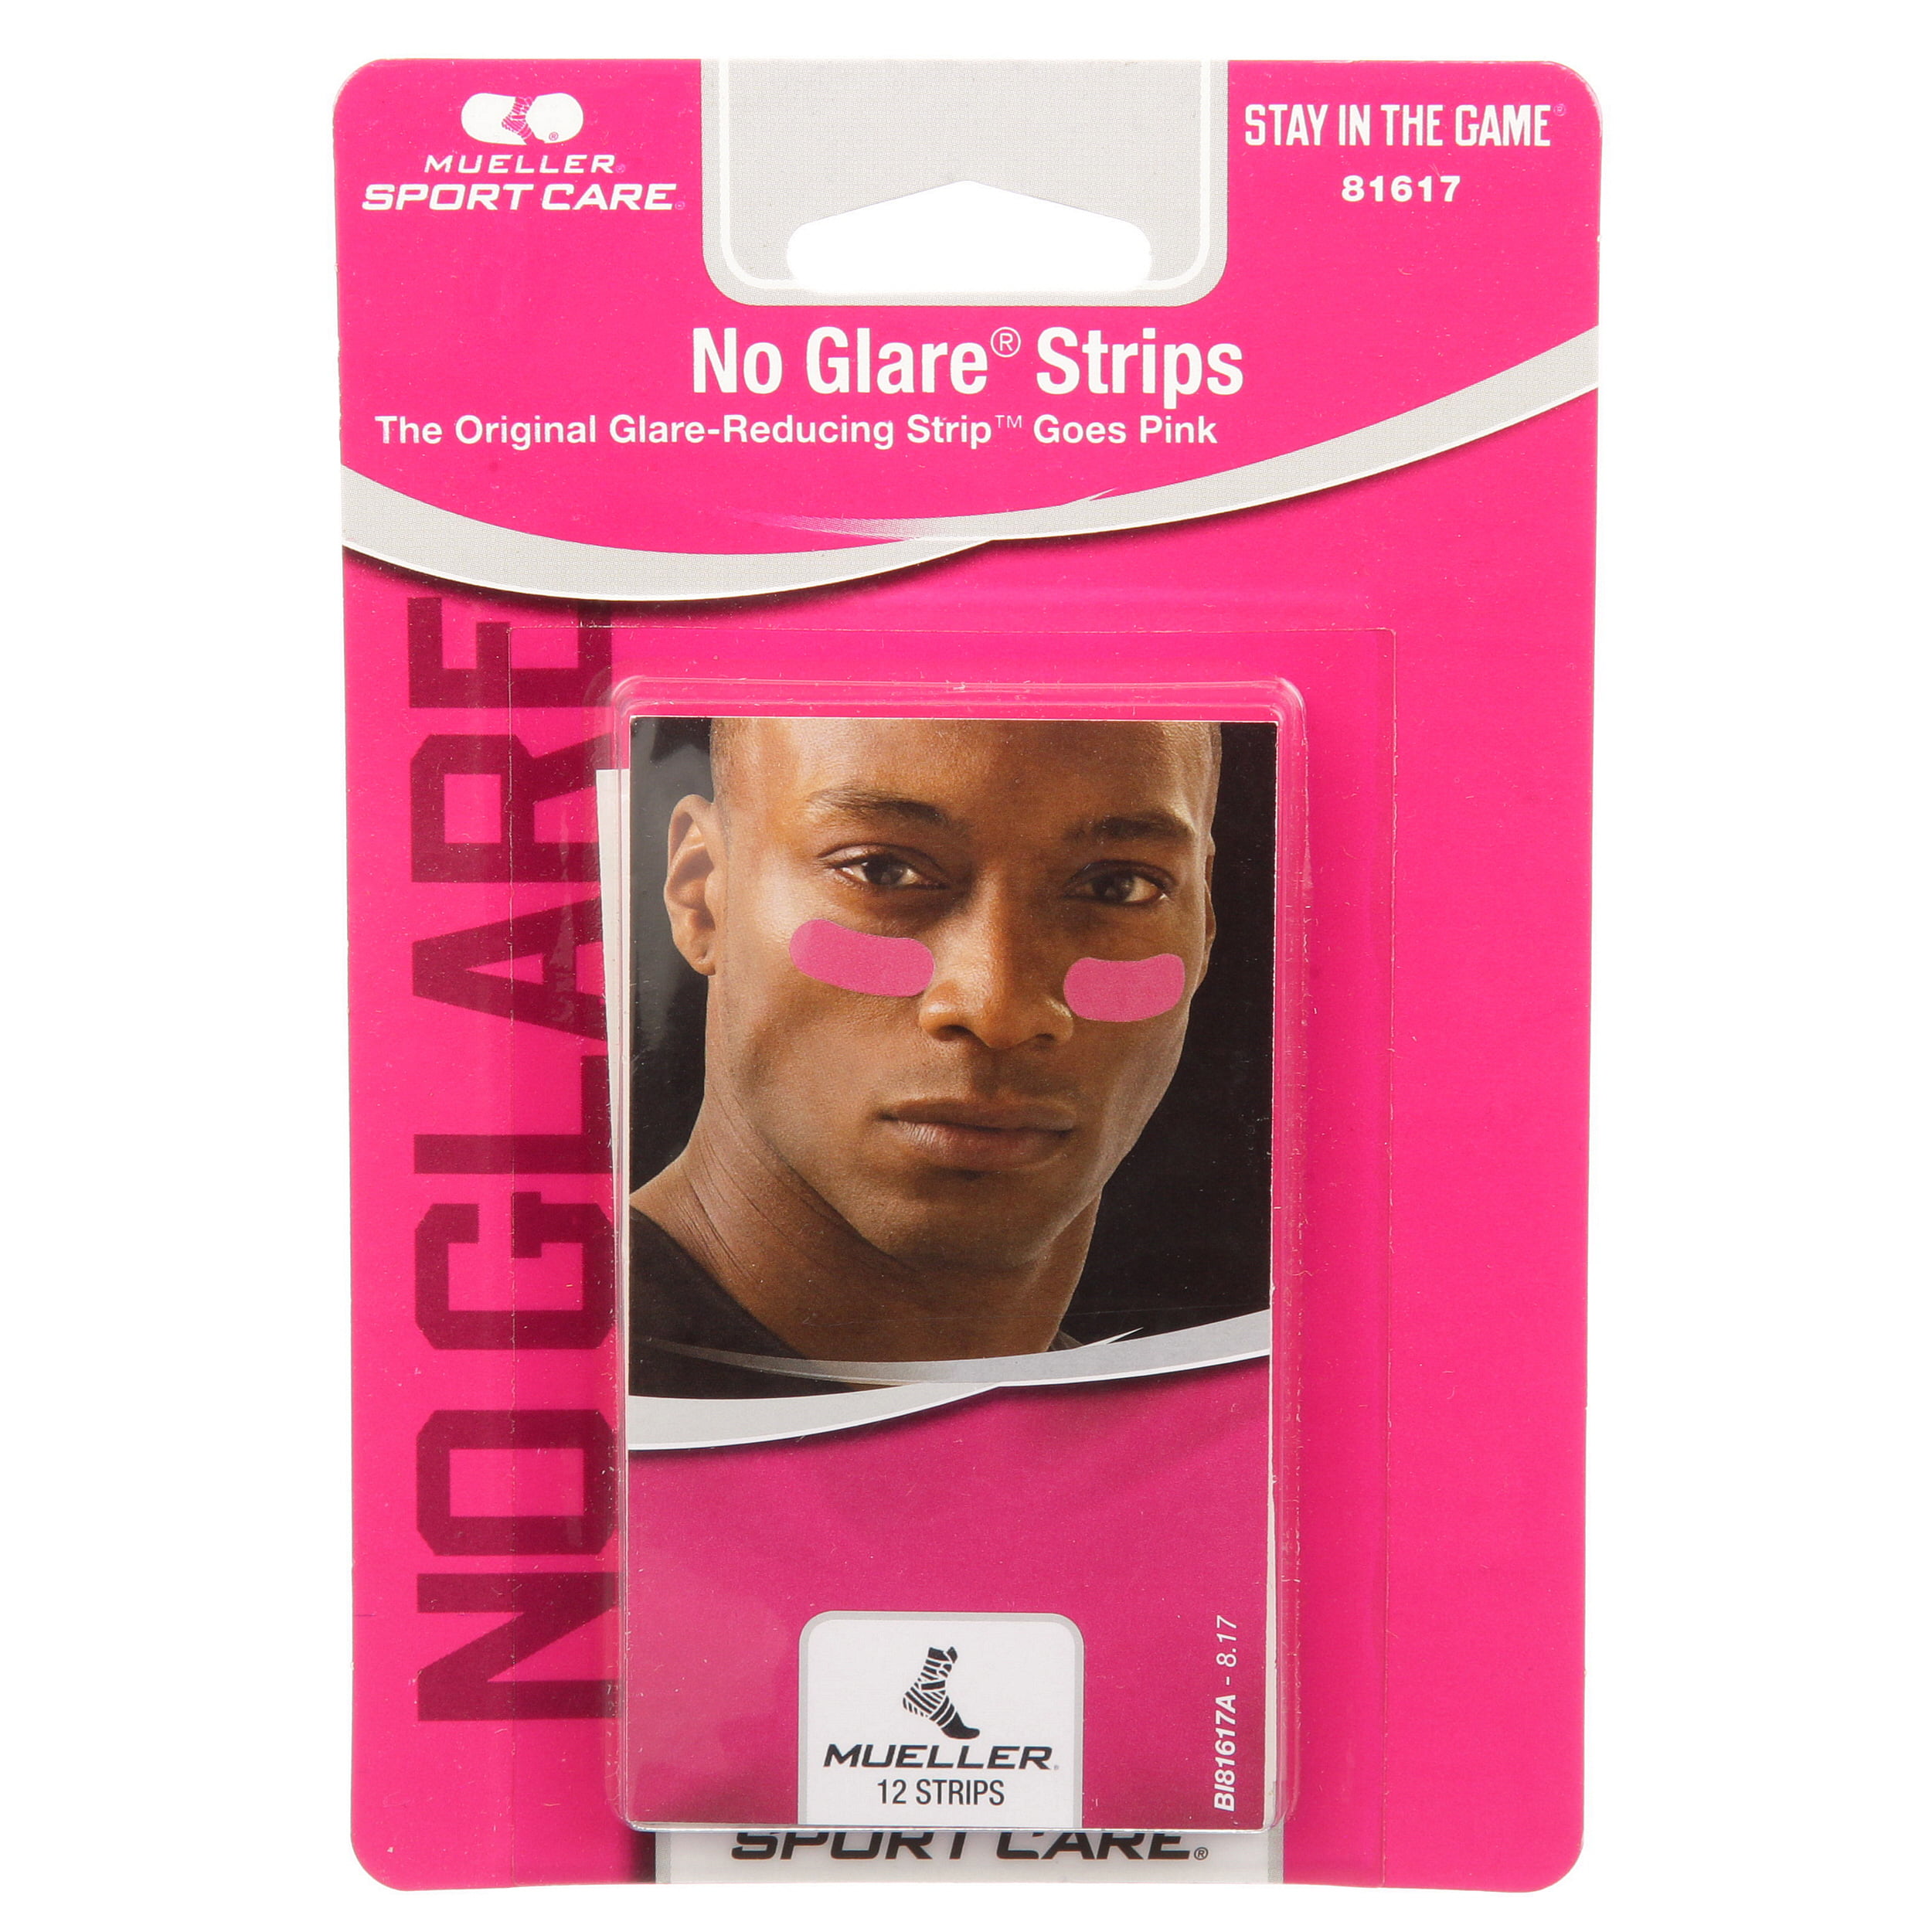 Details about   Mueller Sport Care No Gare Glare-reducing strips 54 assorted shapes 440461A 